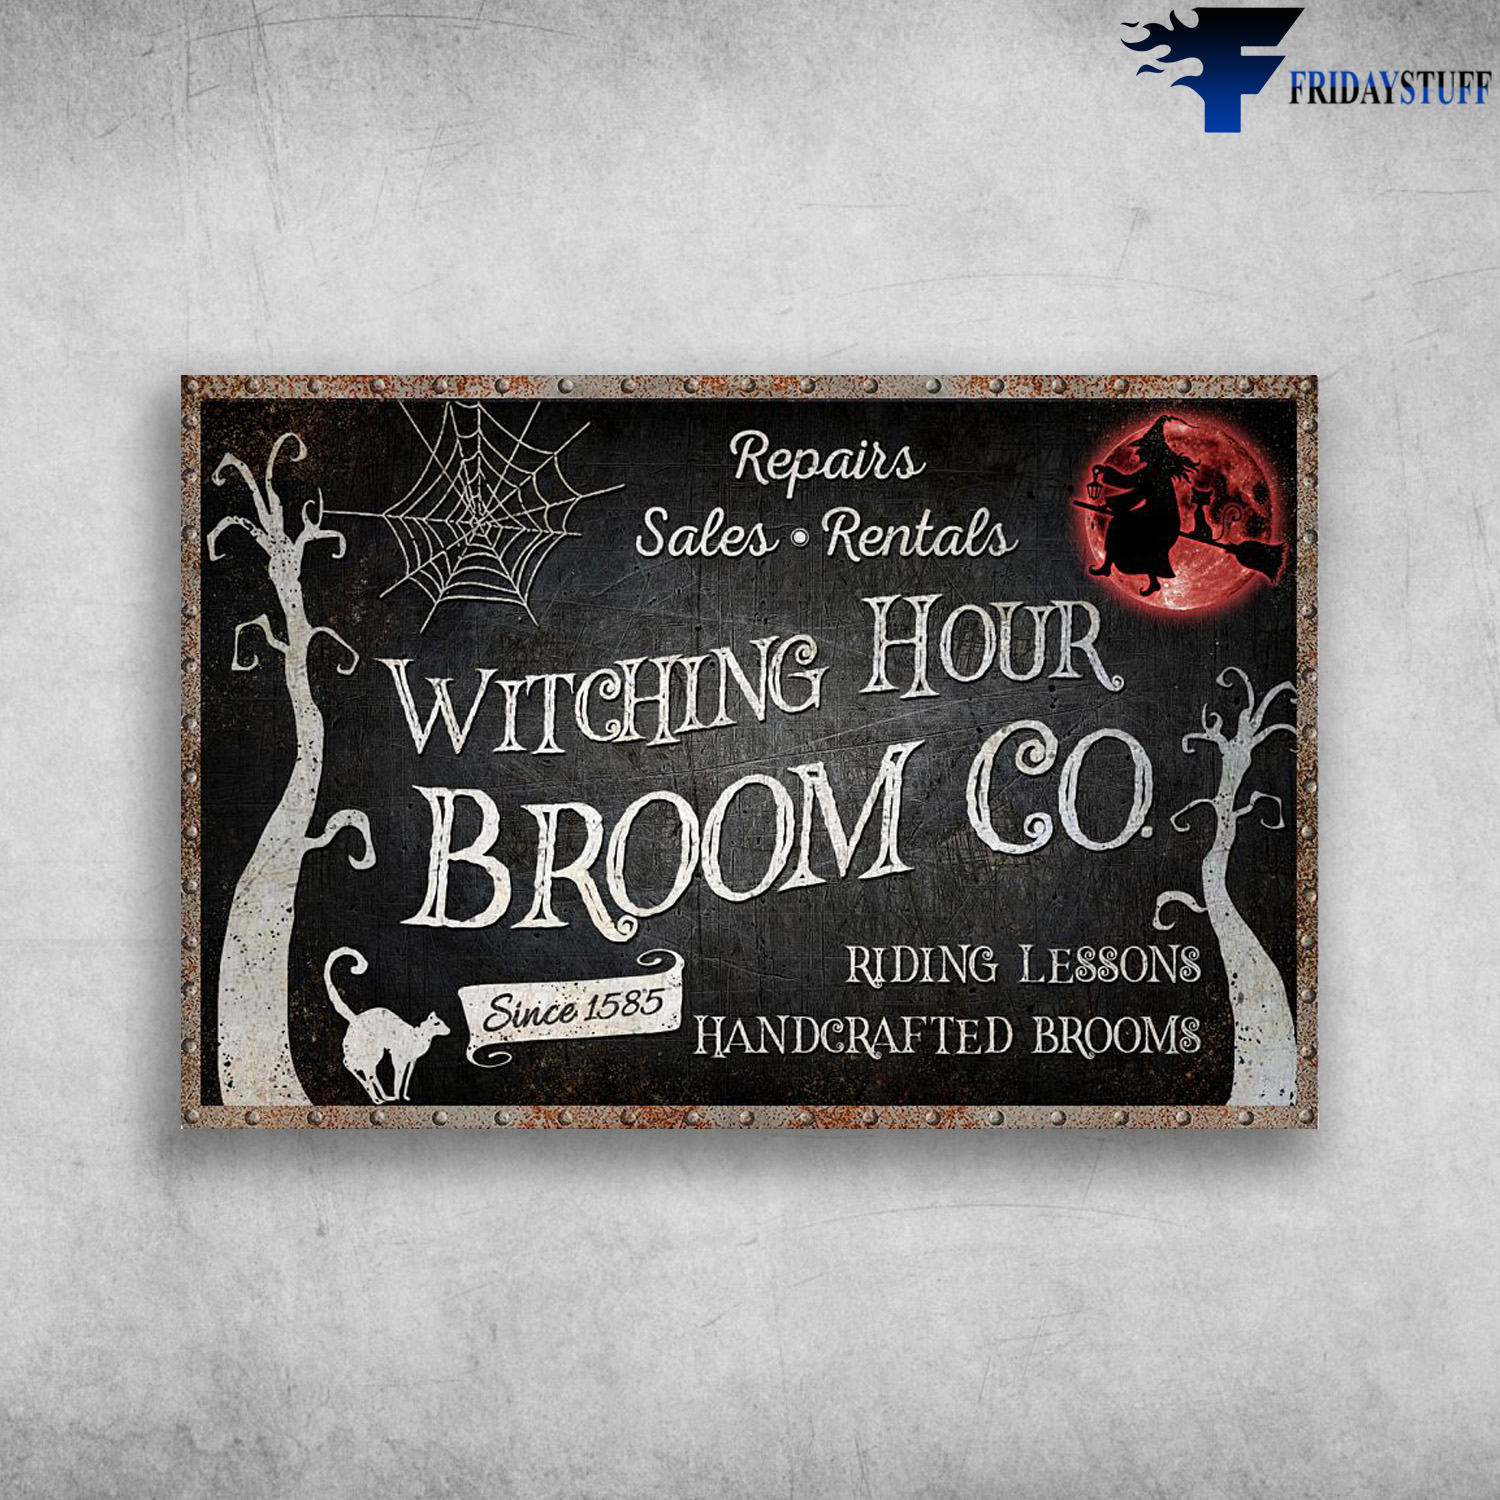 The Witch On The Moon - Repairs, Sales, Rentals, Witching Hour, Broom Co. Since 1585, Riding Lession Handcrafted Brooms